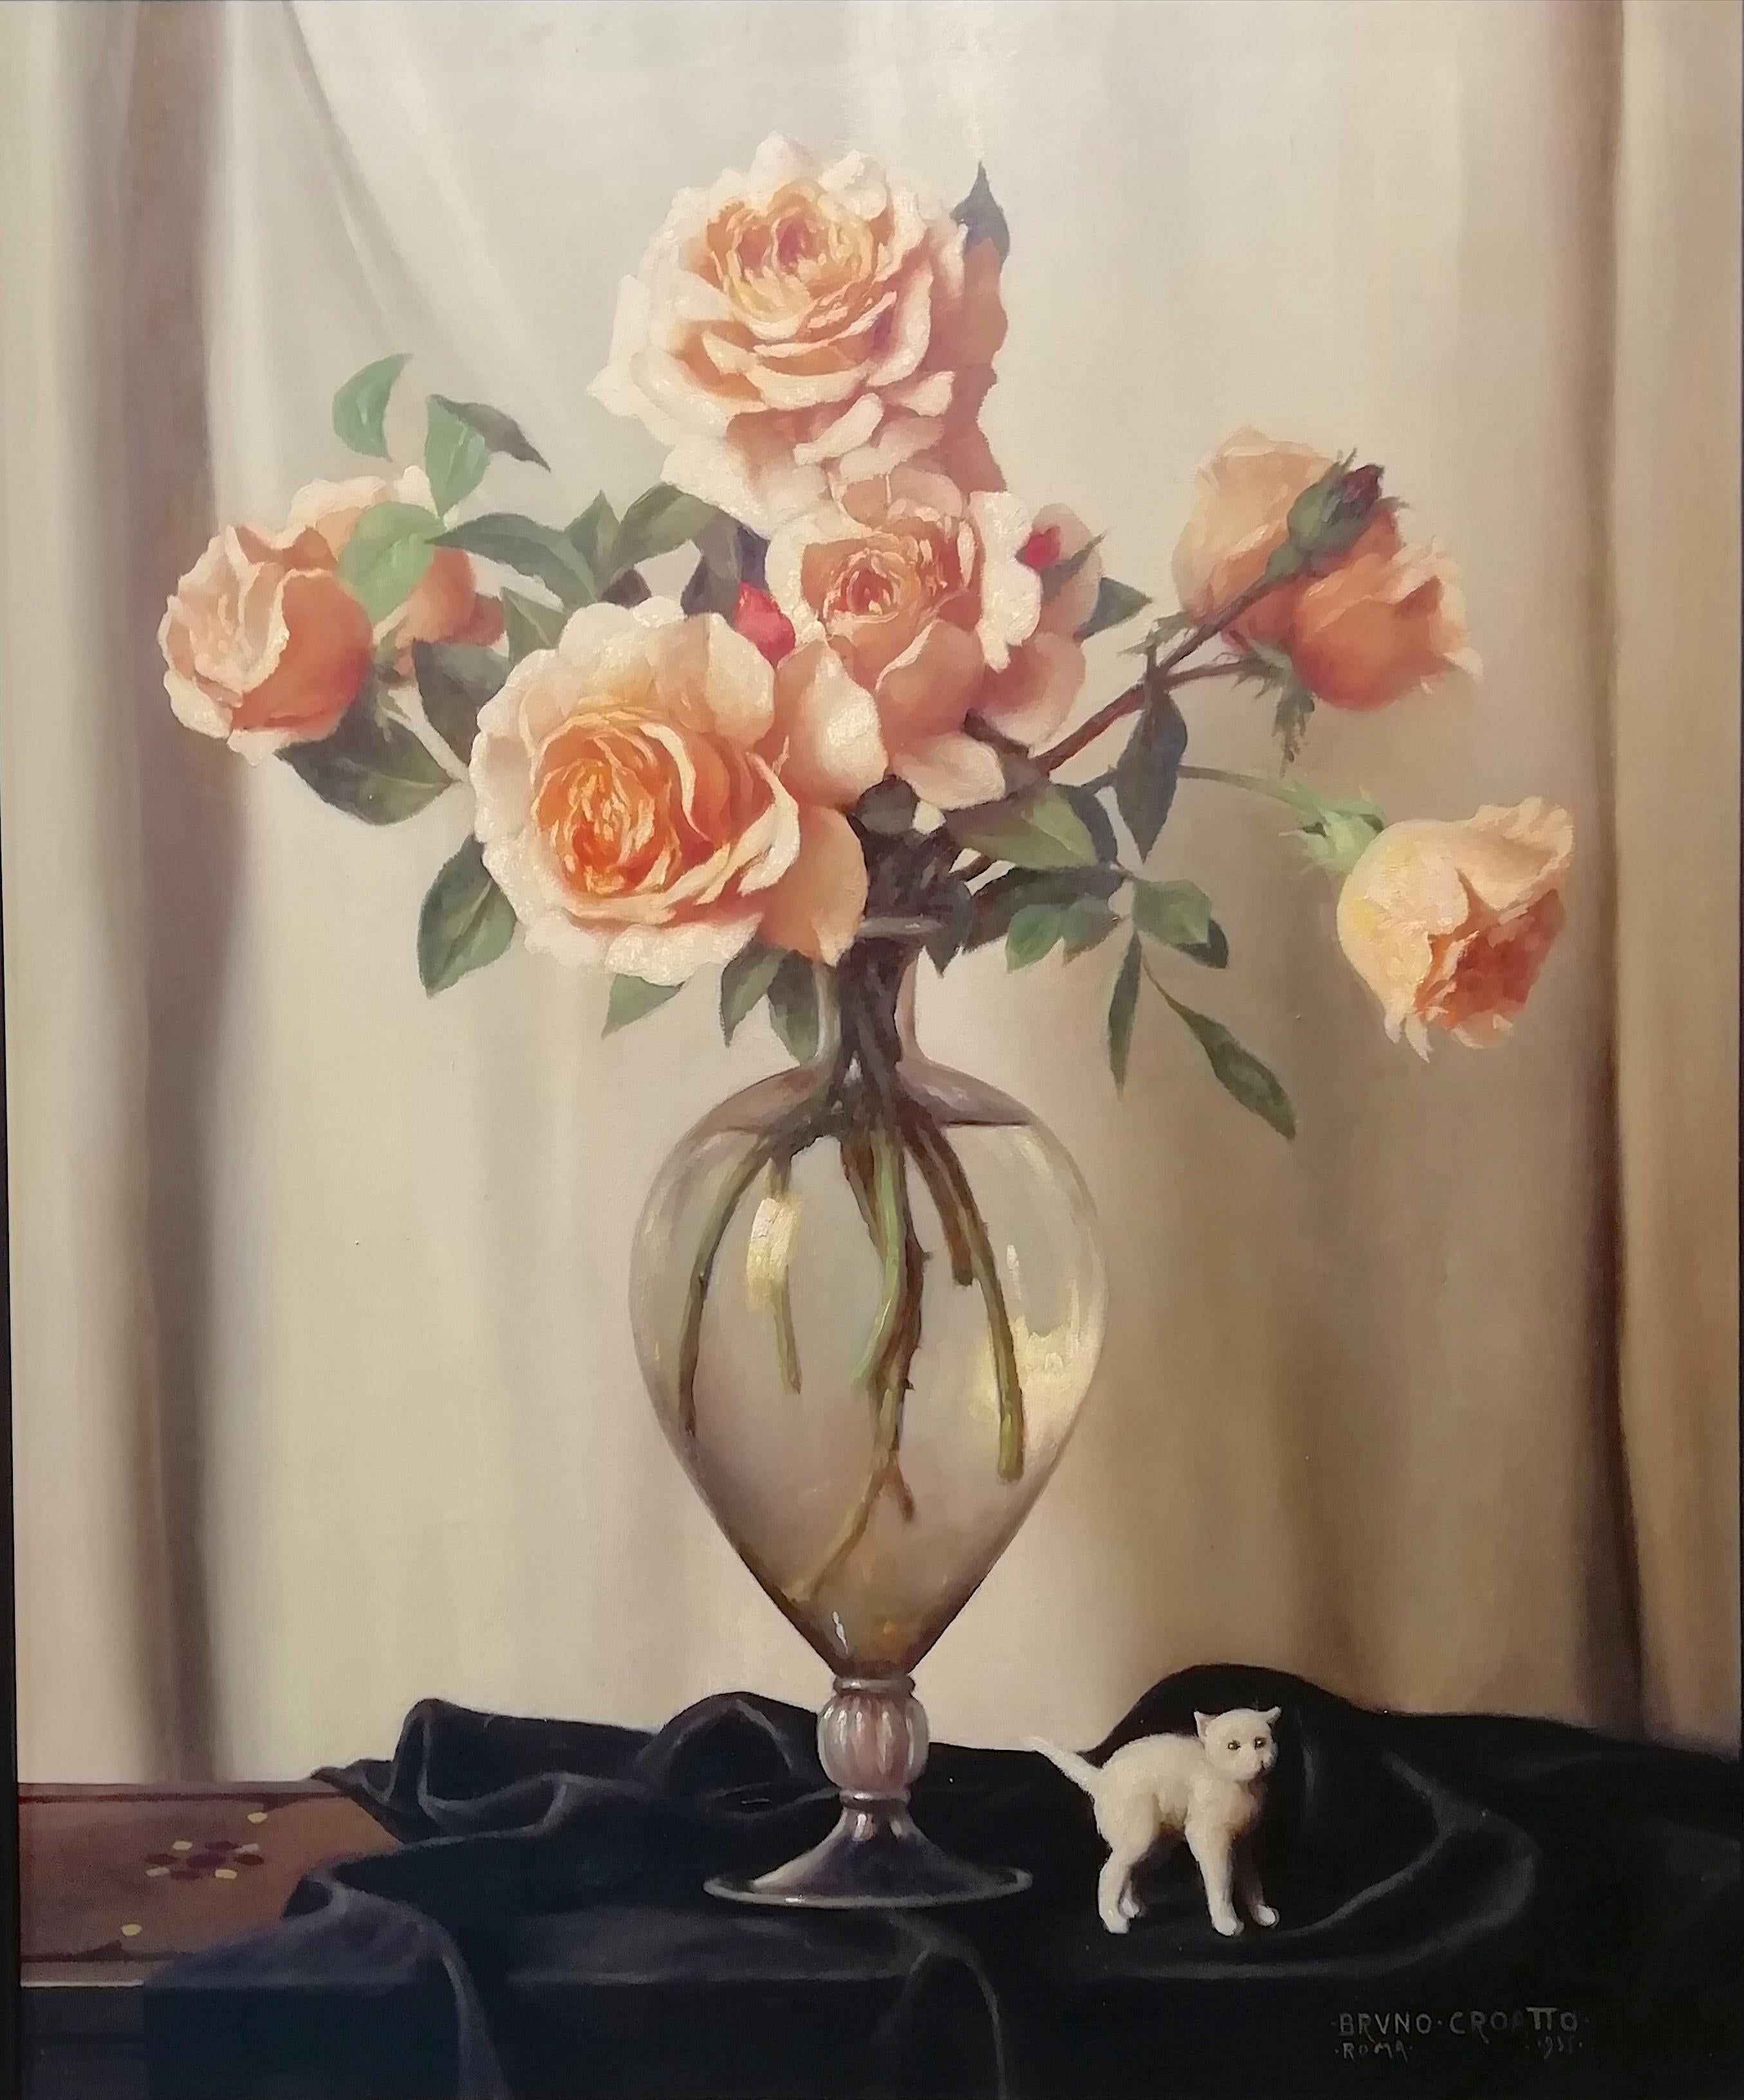 Bruno Croatto (Trieste 1875 - Roma 1948)
Vase with Roses Flowers and Cat
Signed and dated lower right: Bruno Croatto Roma 1935

Bruno Croatto completed his training in Trieste and later perfected his career in Munich by starting in 1897